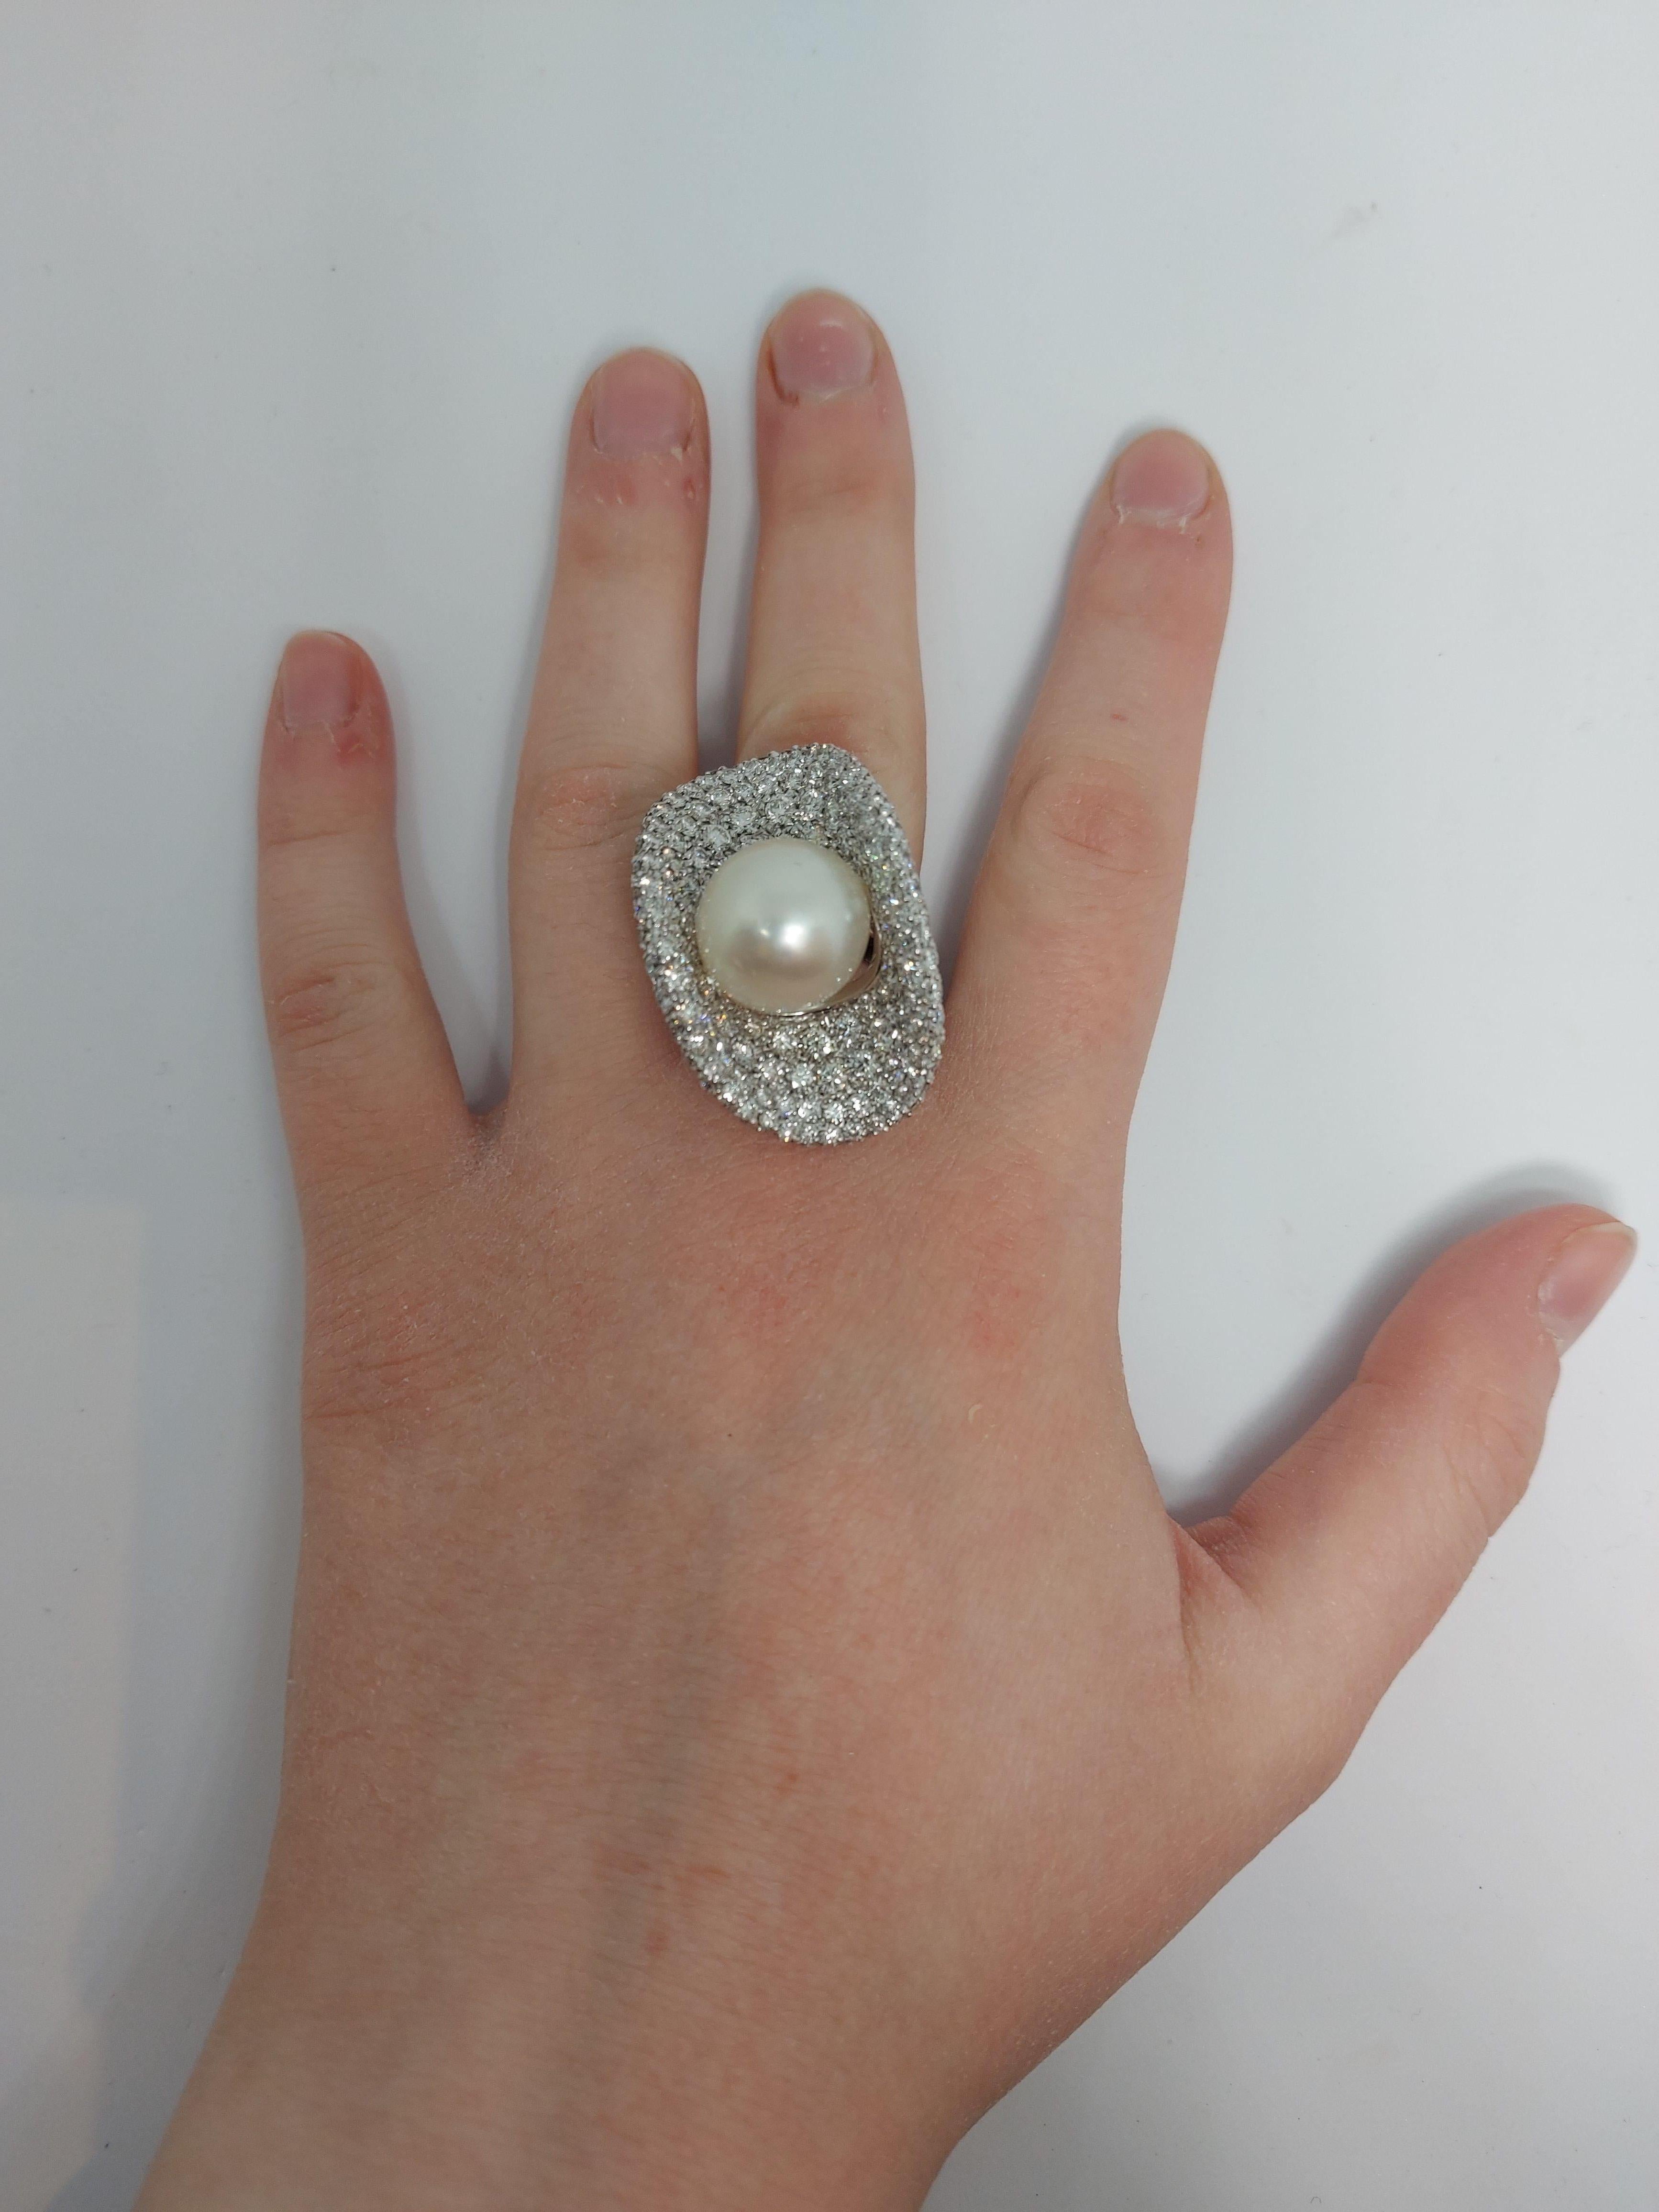 Magnificent 18 Karat White Gold Ring with 14.5 Carat Diamonds and a Big Pearl For Sale 7